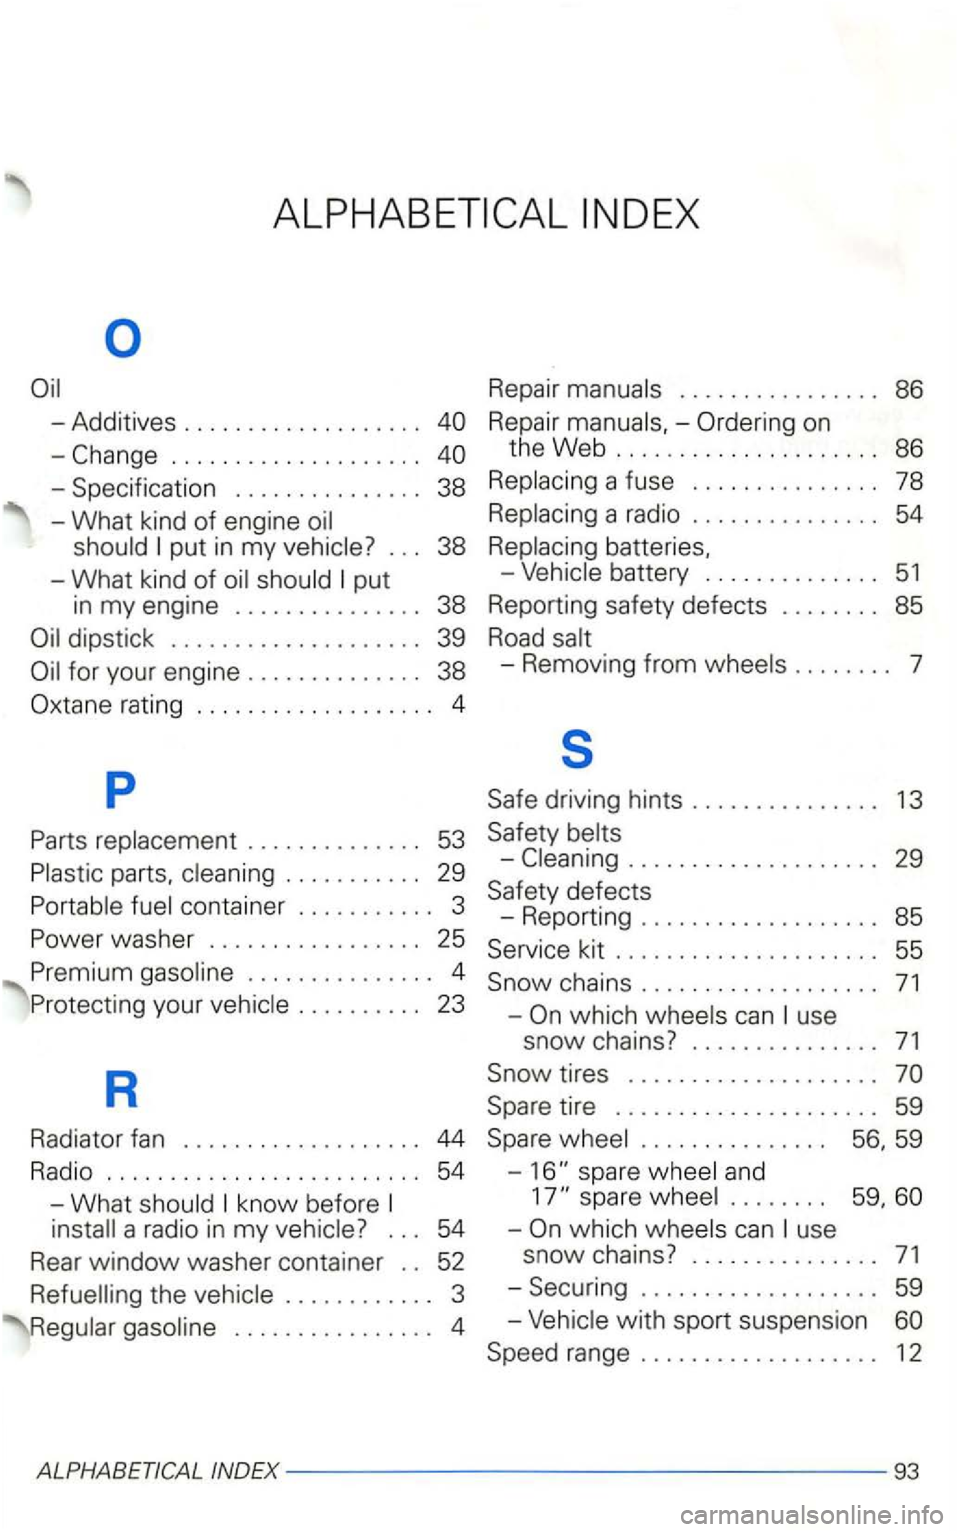 VOLKSWAGEN GOLF 2003  Owners Manual ................... . 
put in my vehicle? .. .  Replacing 
a radio  . . . .  . . .  . . . . . . .  . 54 
38  Replacing  batteries. 
-What kind of oil  should put 
in my engine  . . . .  . . . . . .  .